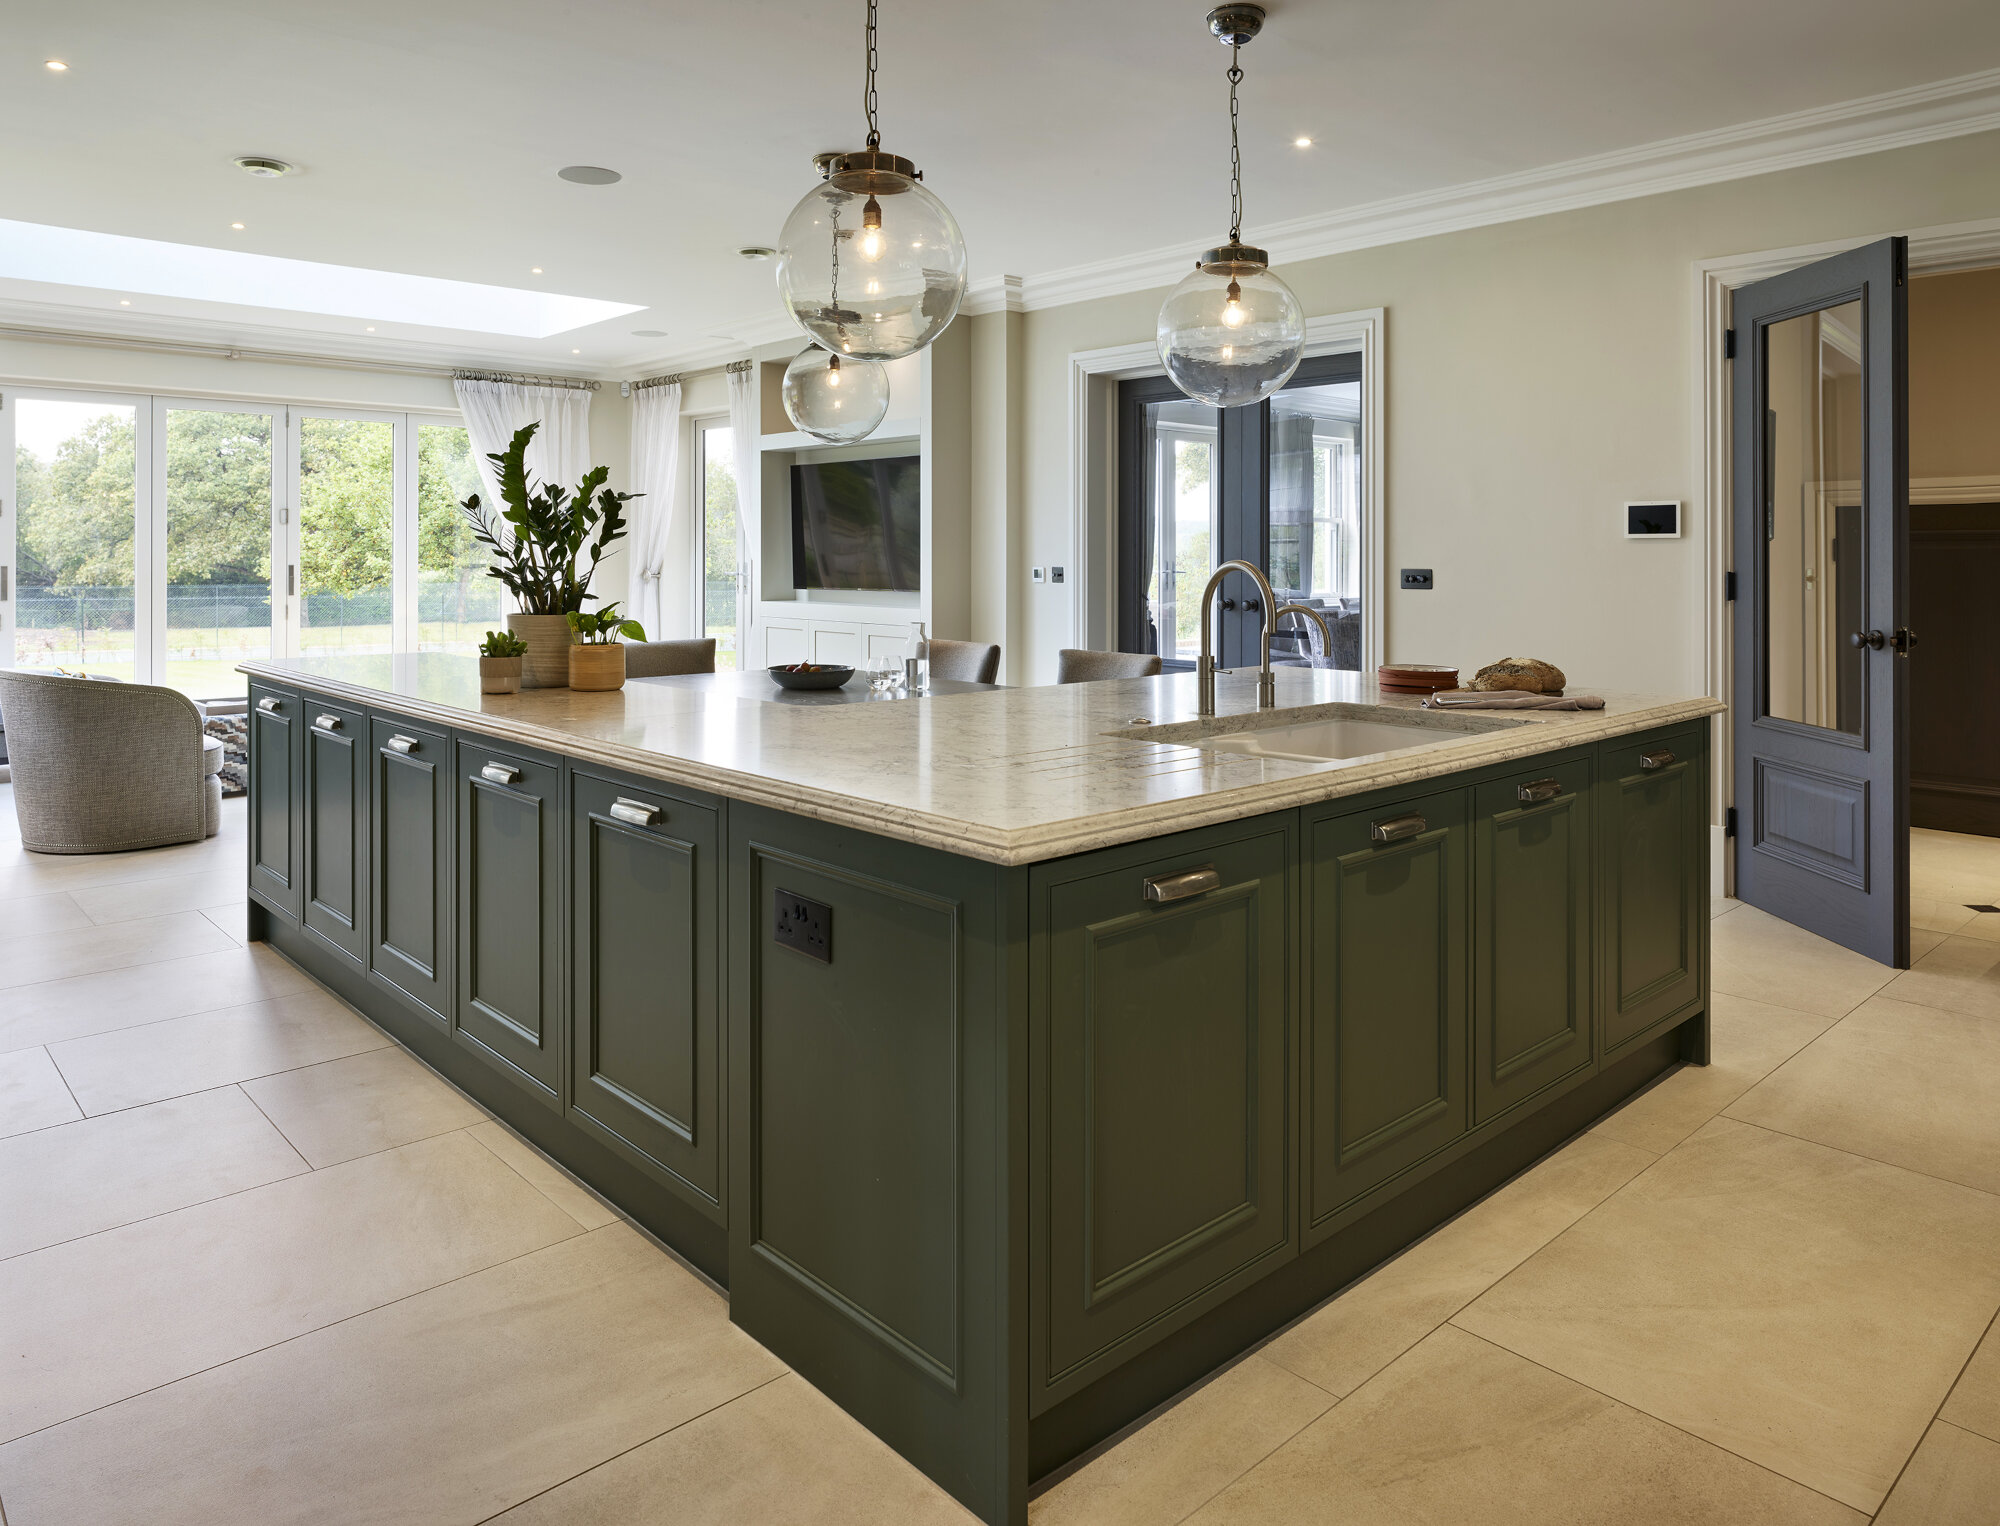 High End traditional Kitchens In Mablethorpe